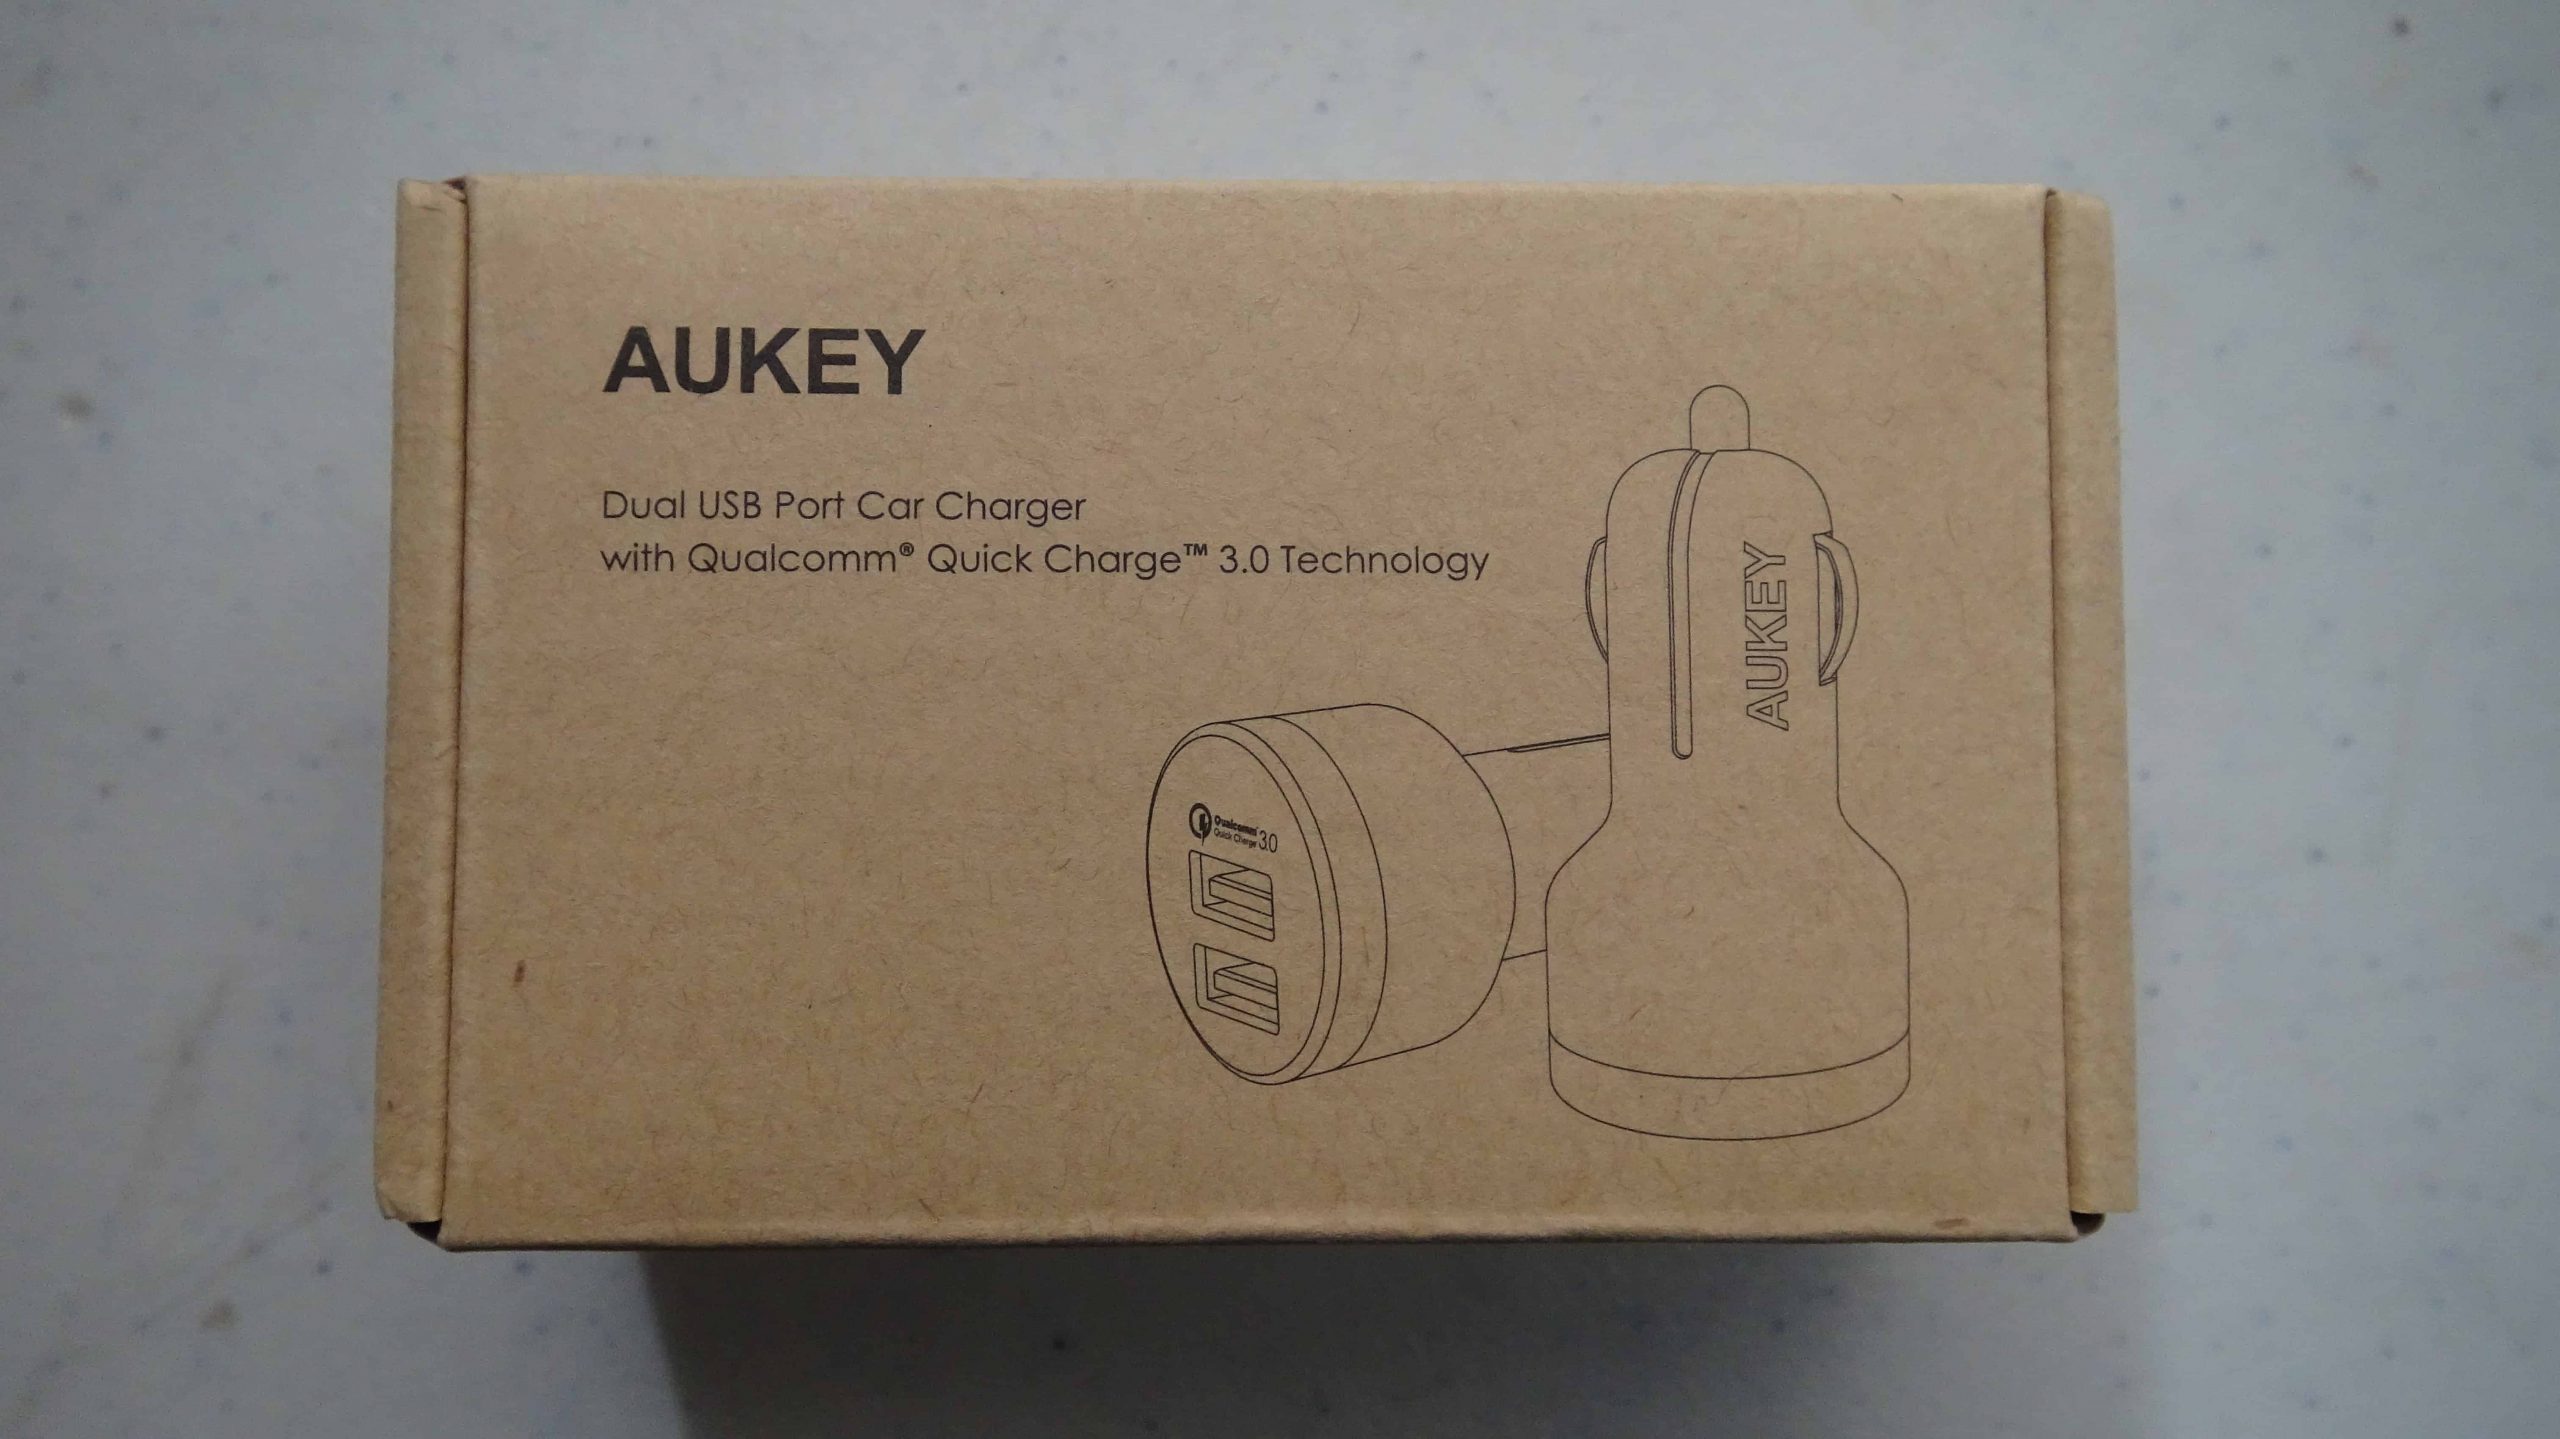 Aukey Dual USB Port Car Charger with Qualcomm Quick Charge 3.0 - 5